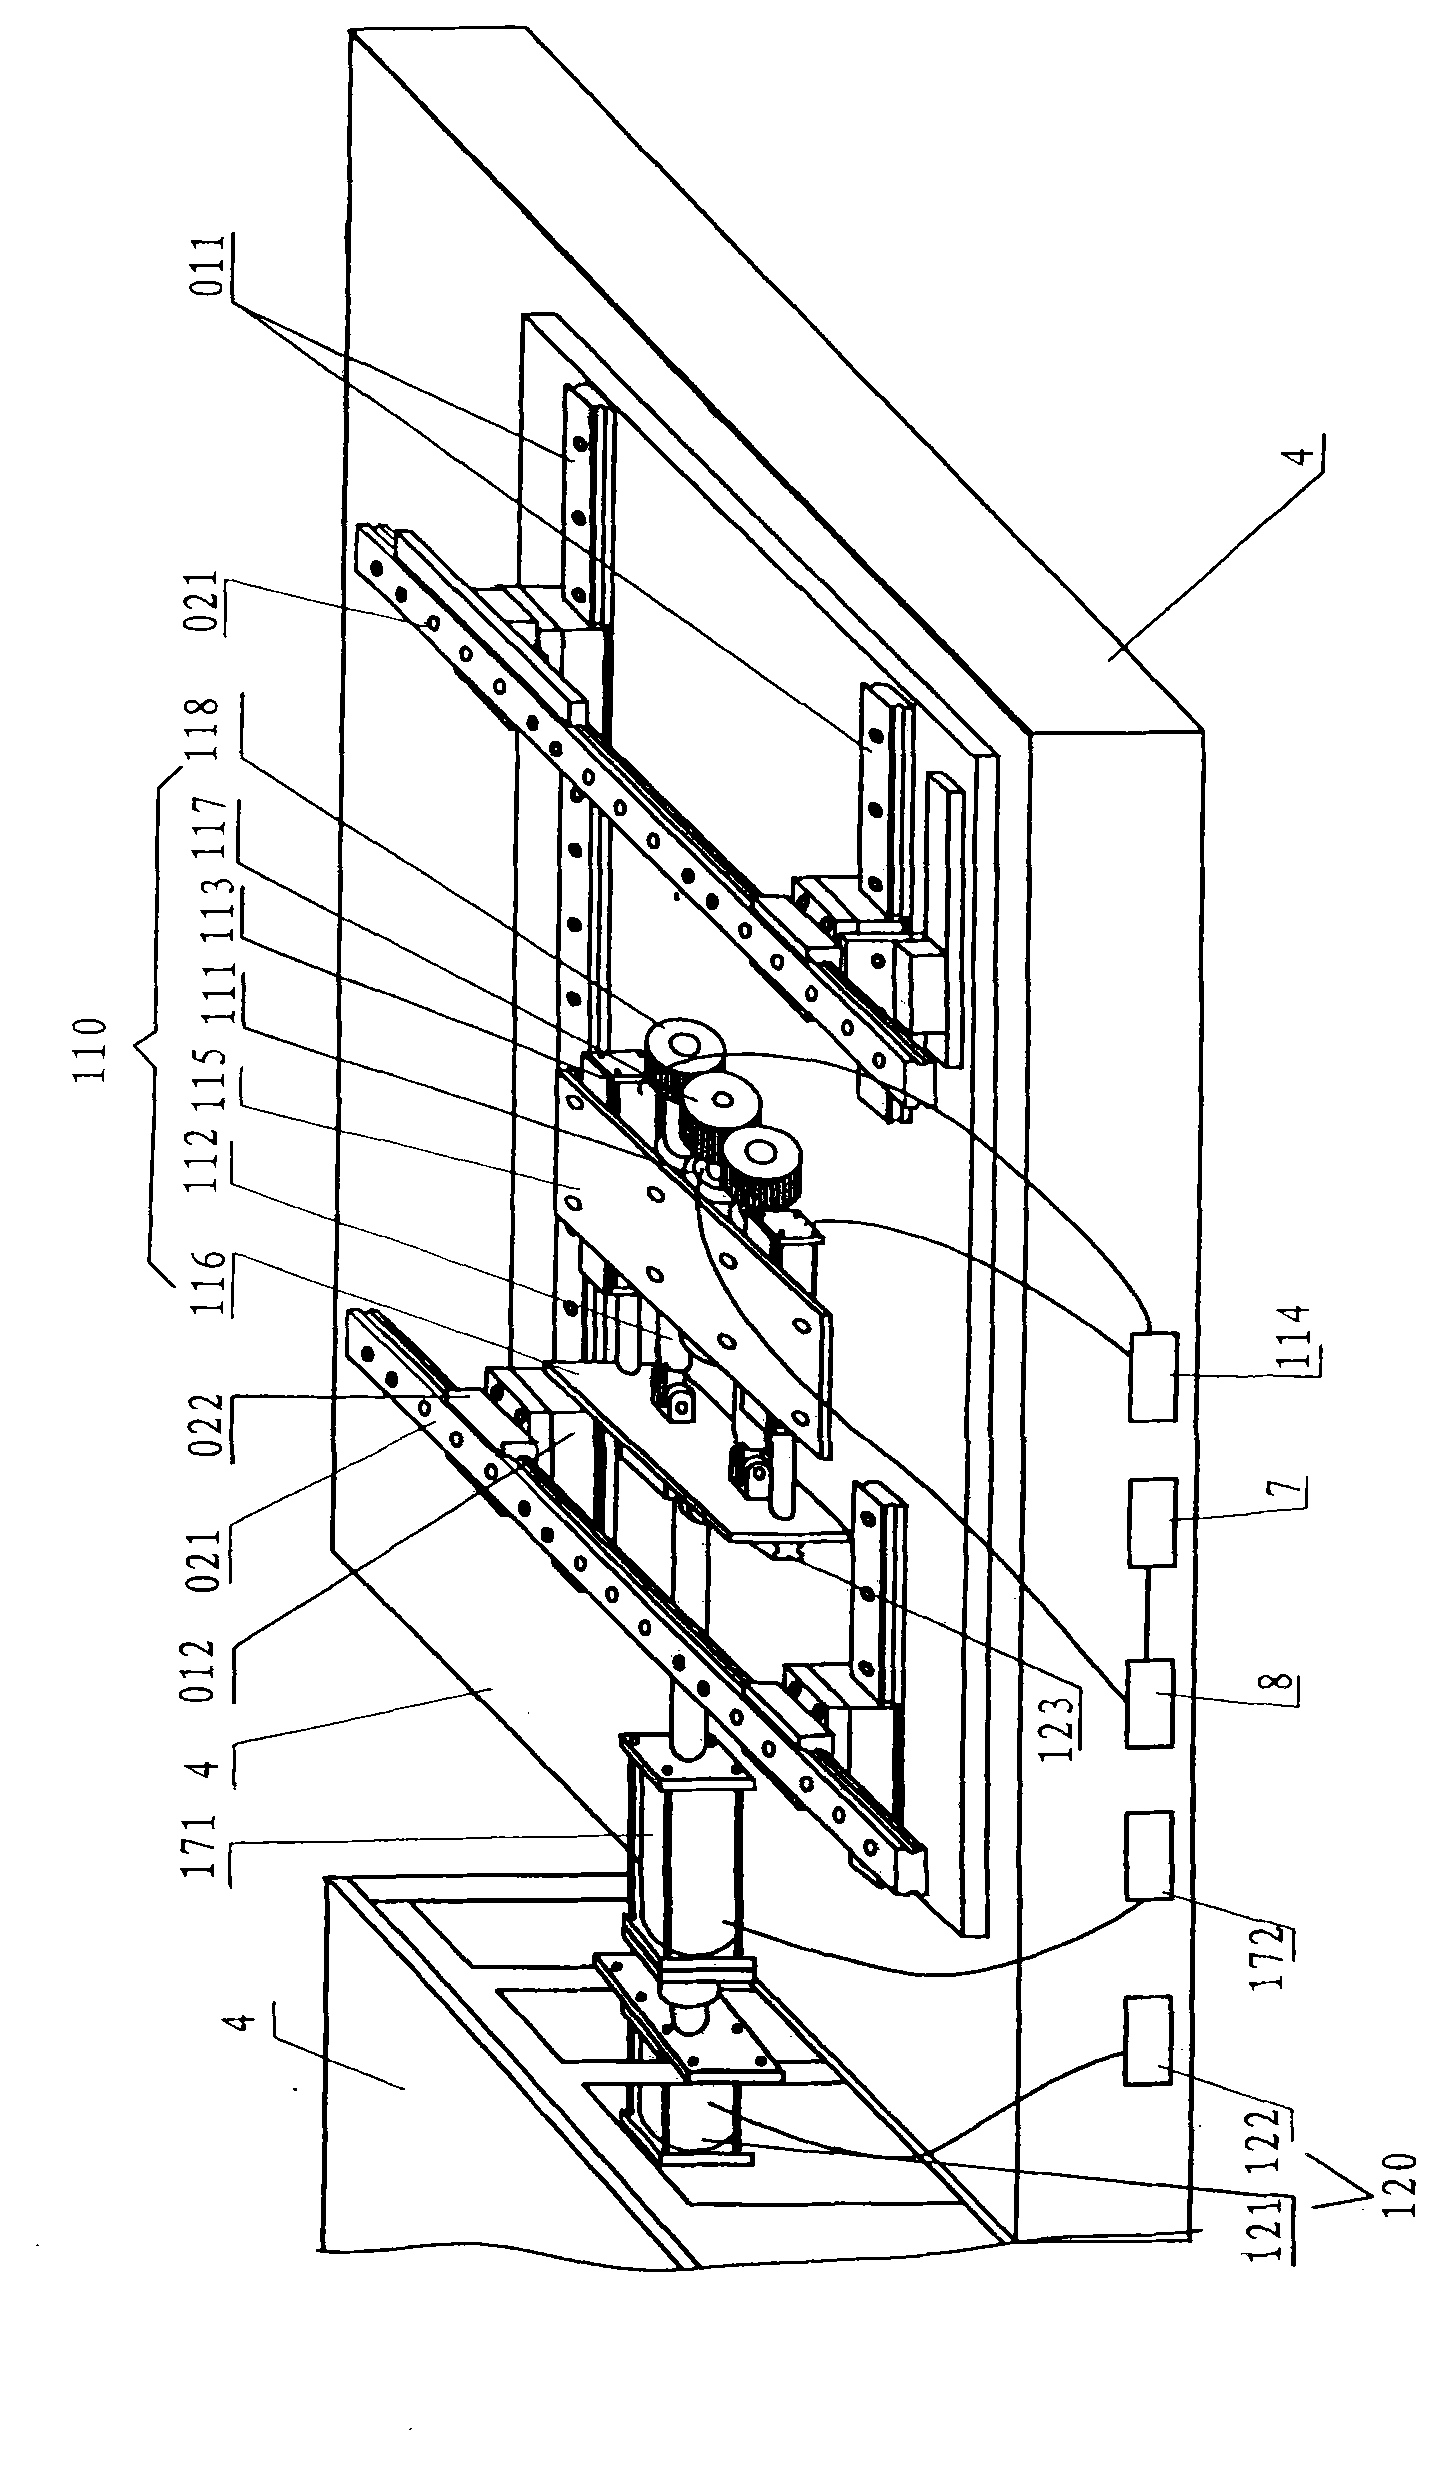 Device for displacing printing pressing force and eliminating tolerance clearance of curved-surface printing machine